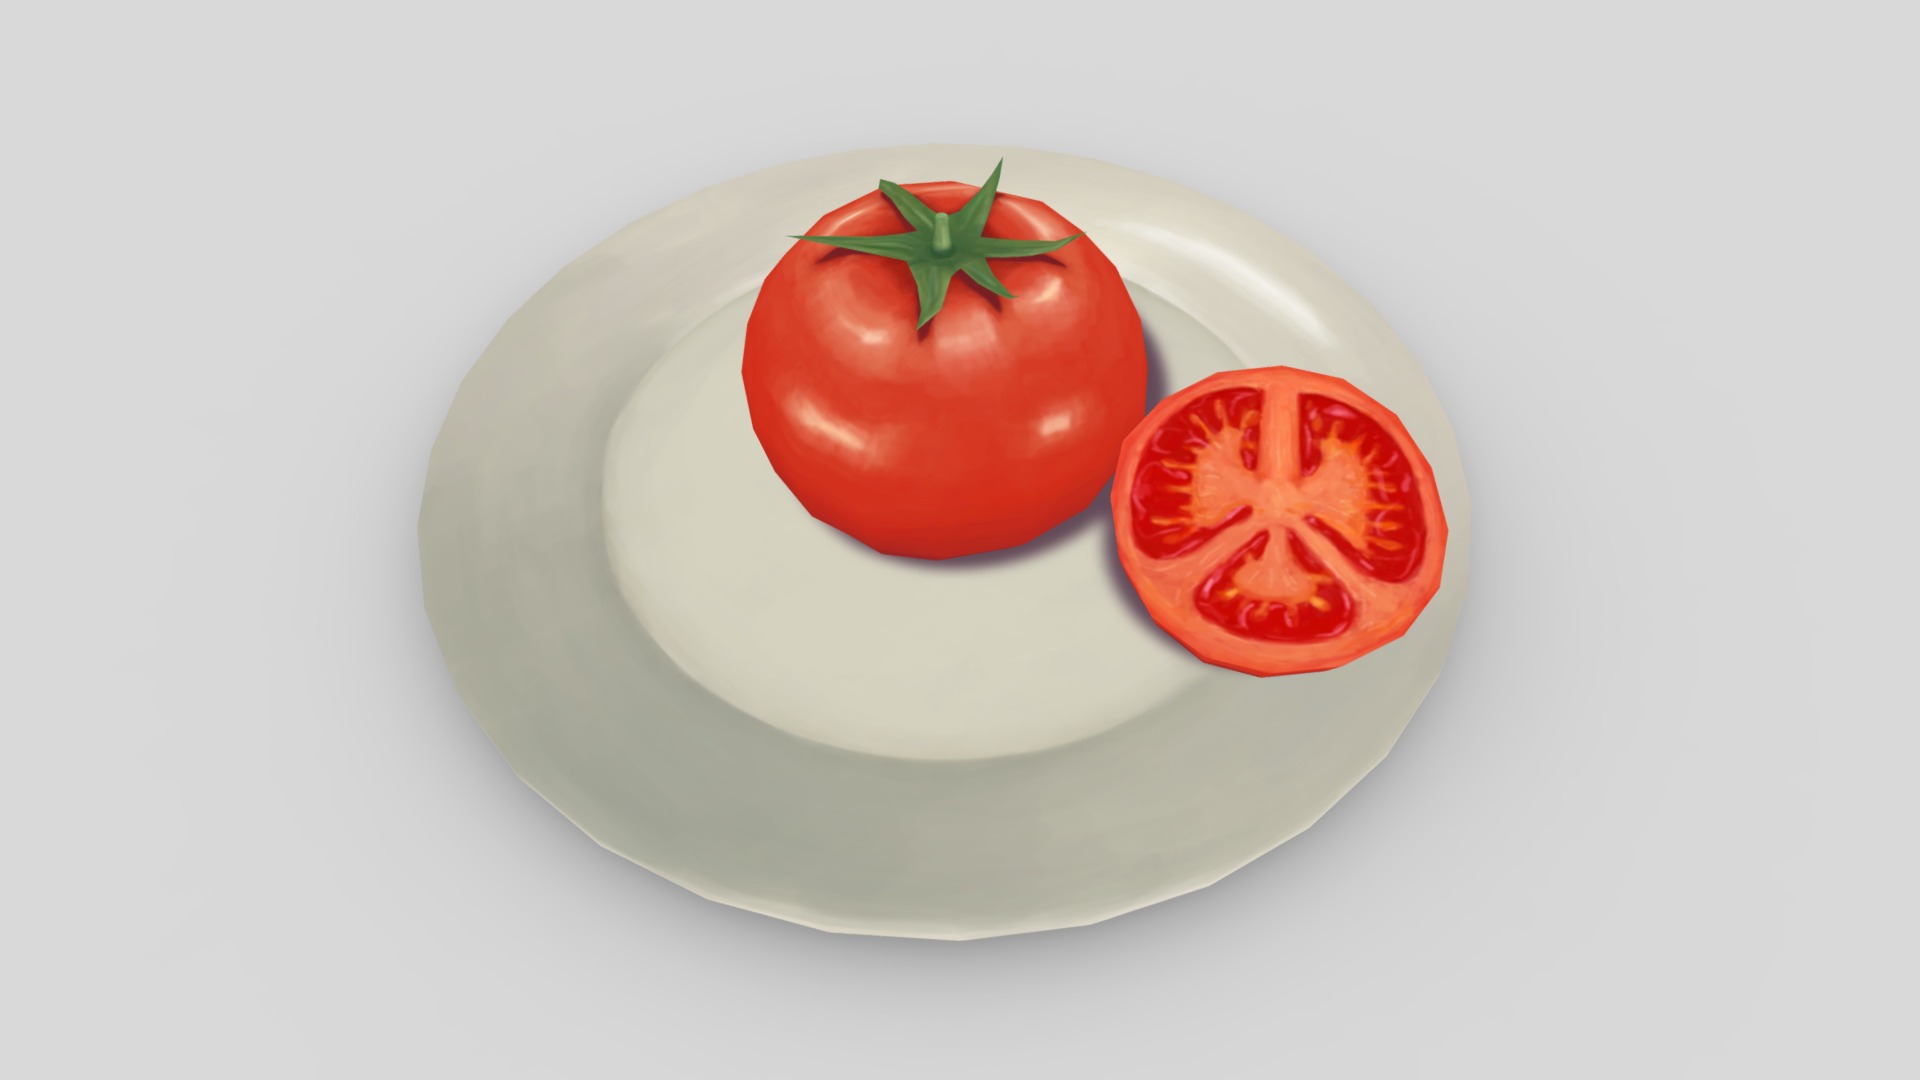 3D model Tomato low poly - This is a 3D model of the Tomato low poly. The 3D model is about a tomato on a plate.